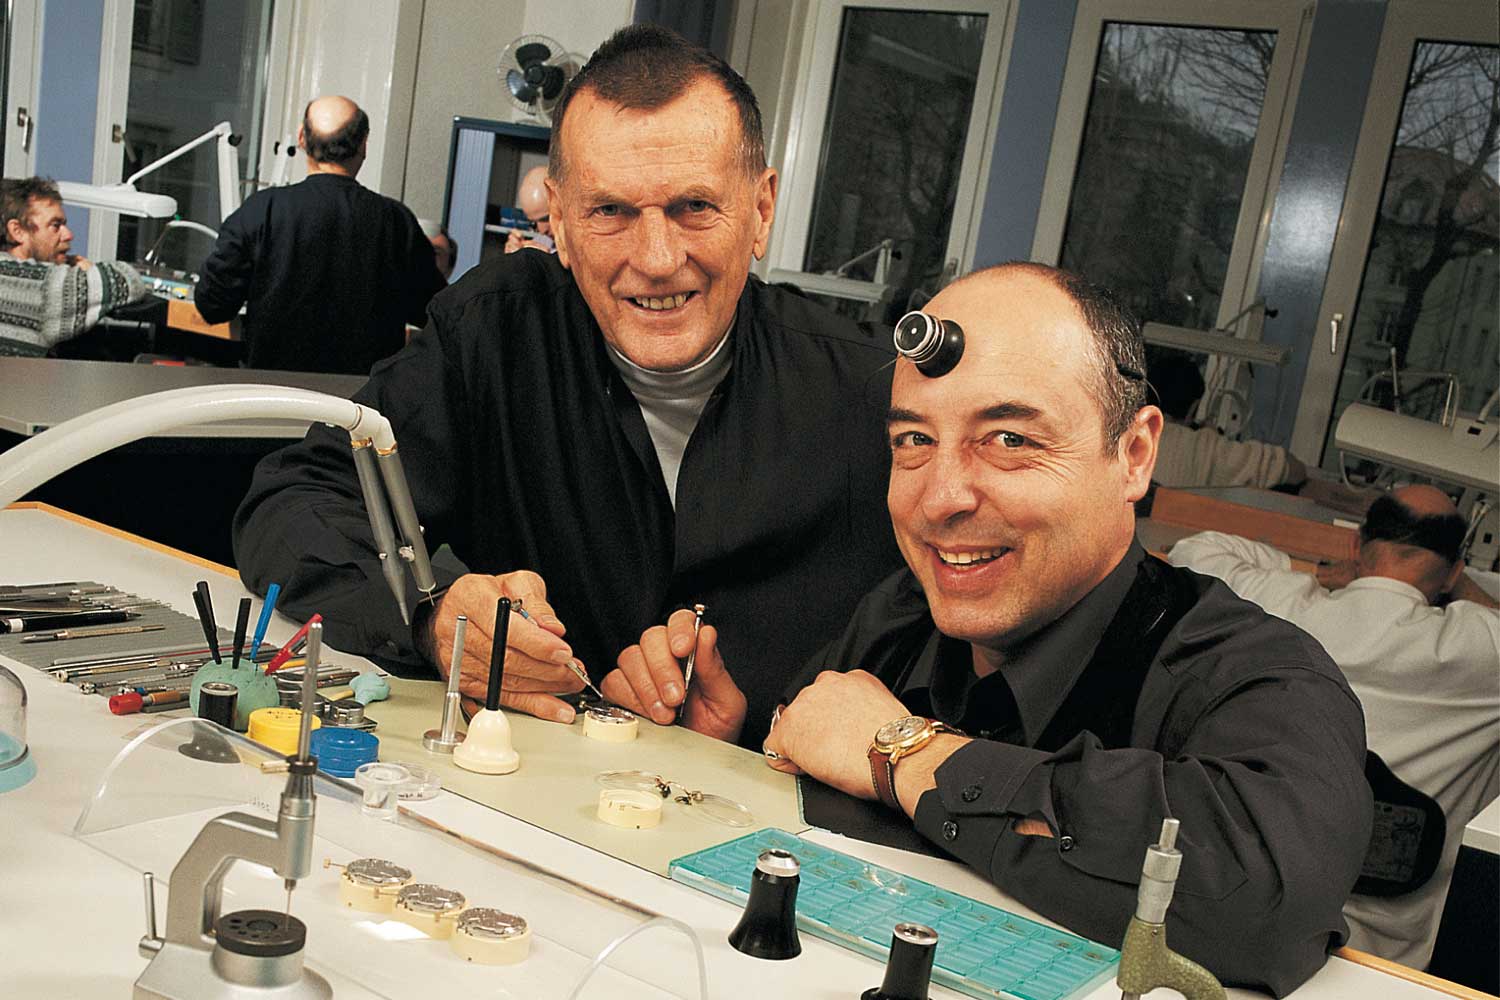 Ludwig Oechslin (right) pictured with Rolf W. Schnyder (Ulysse Nardin)